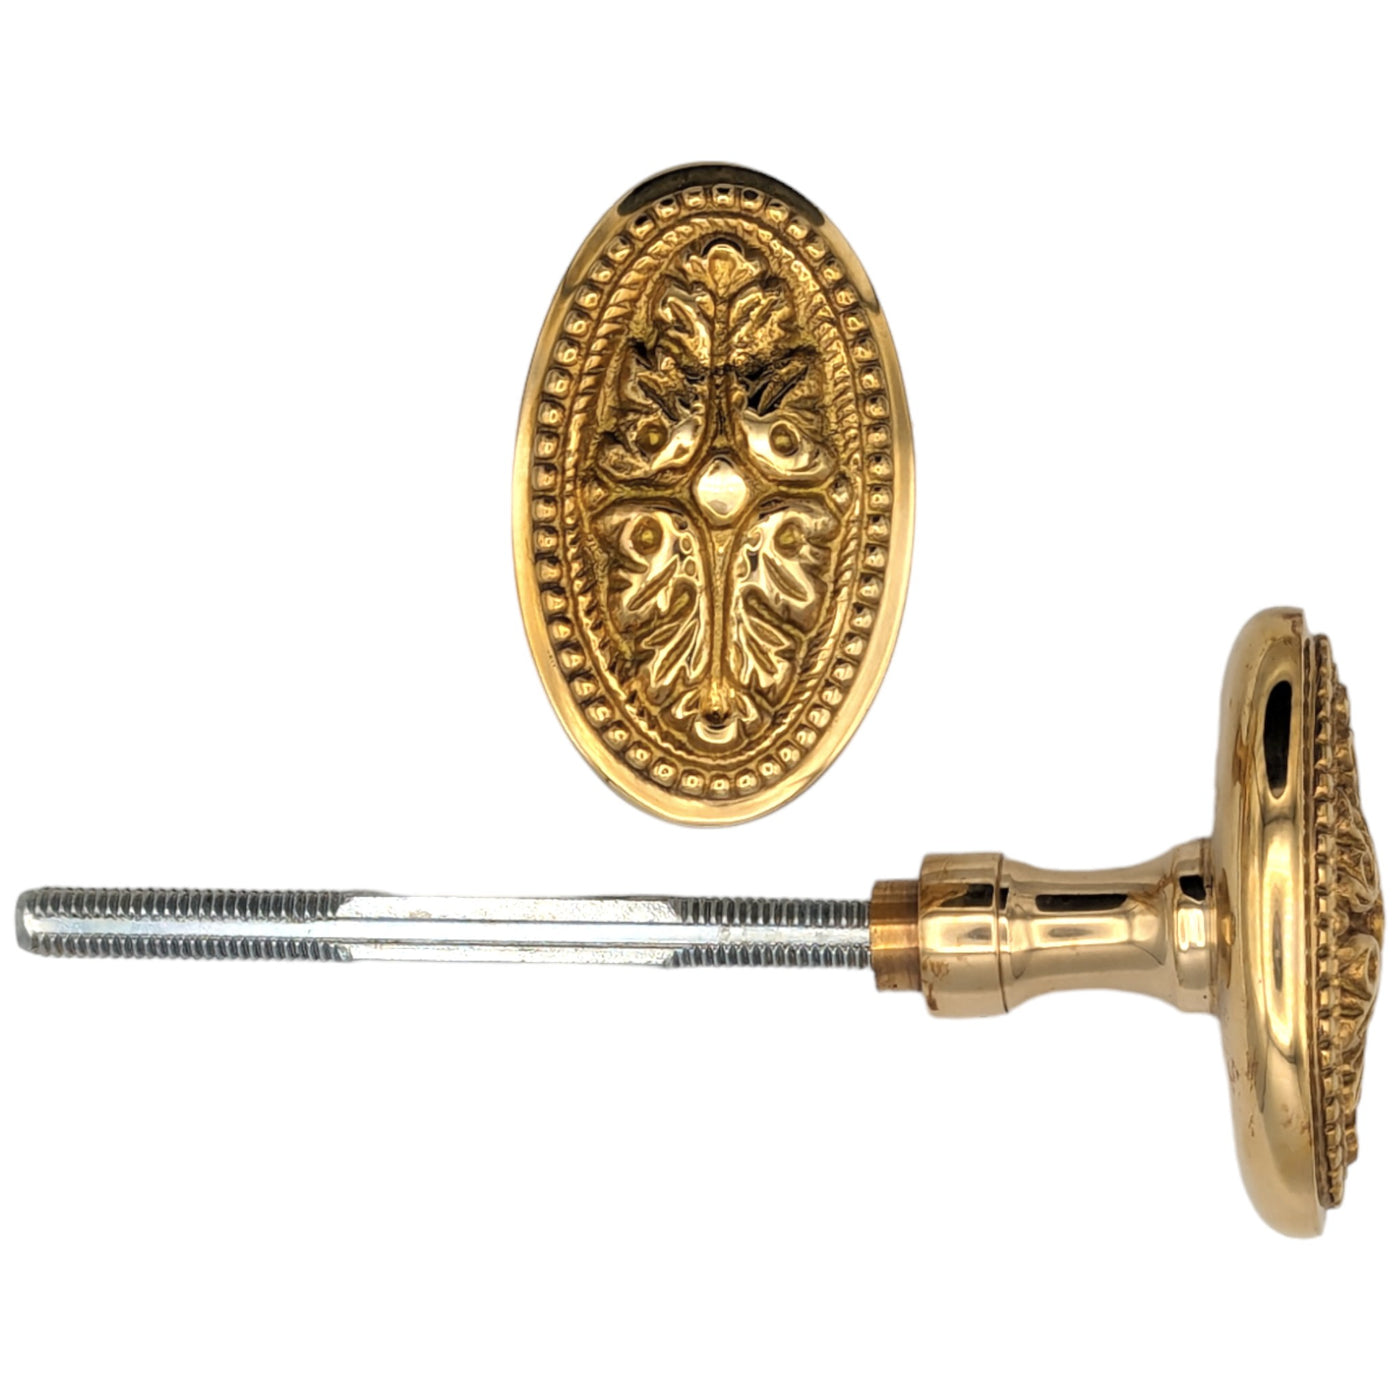 Avalon Oval Solid Brass Spare Door Knob Set (Several Finishes Available)